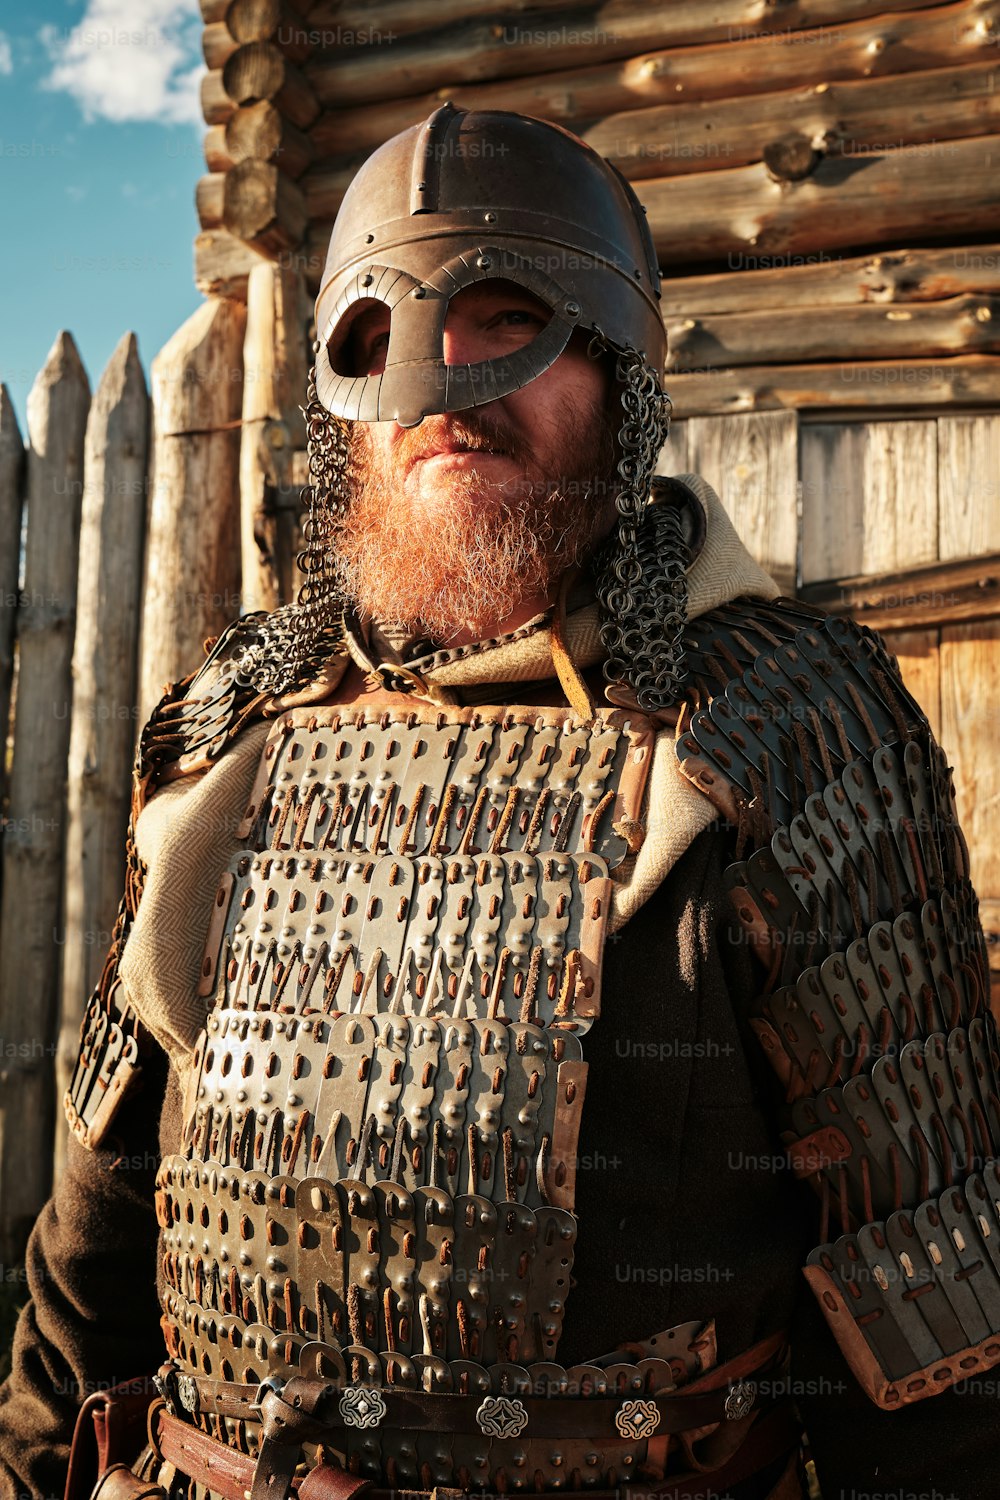 a man wearing a helmet and armor standing in front of a wooden fence